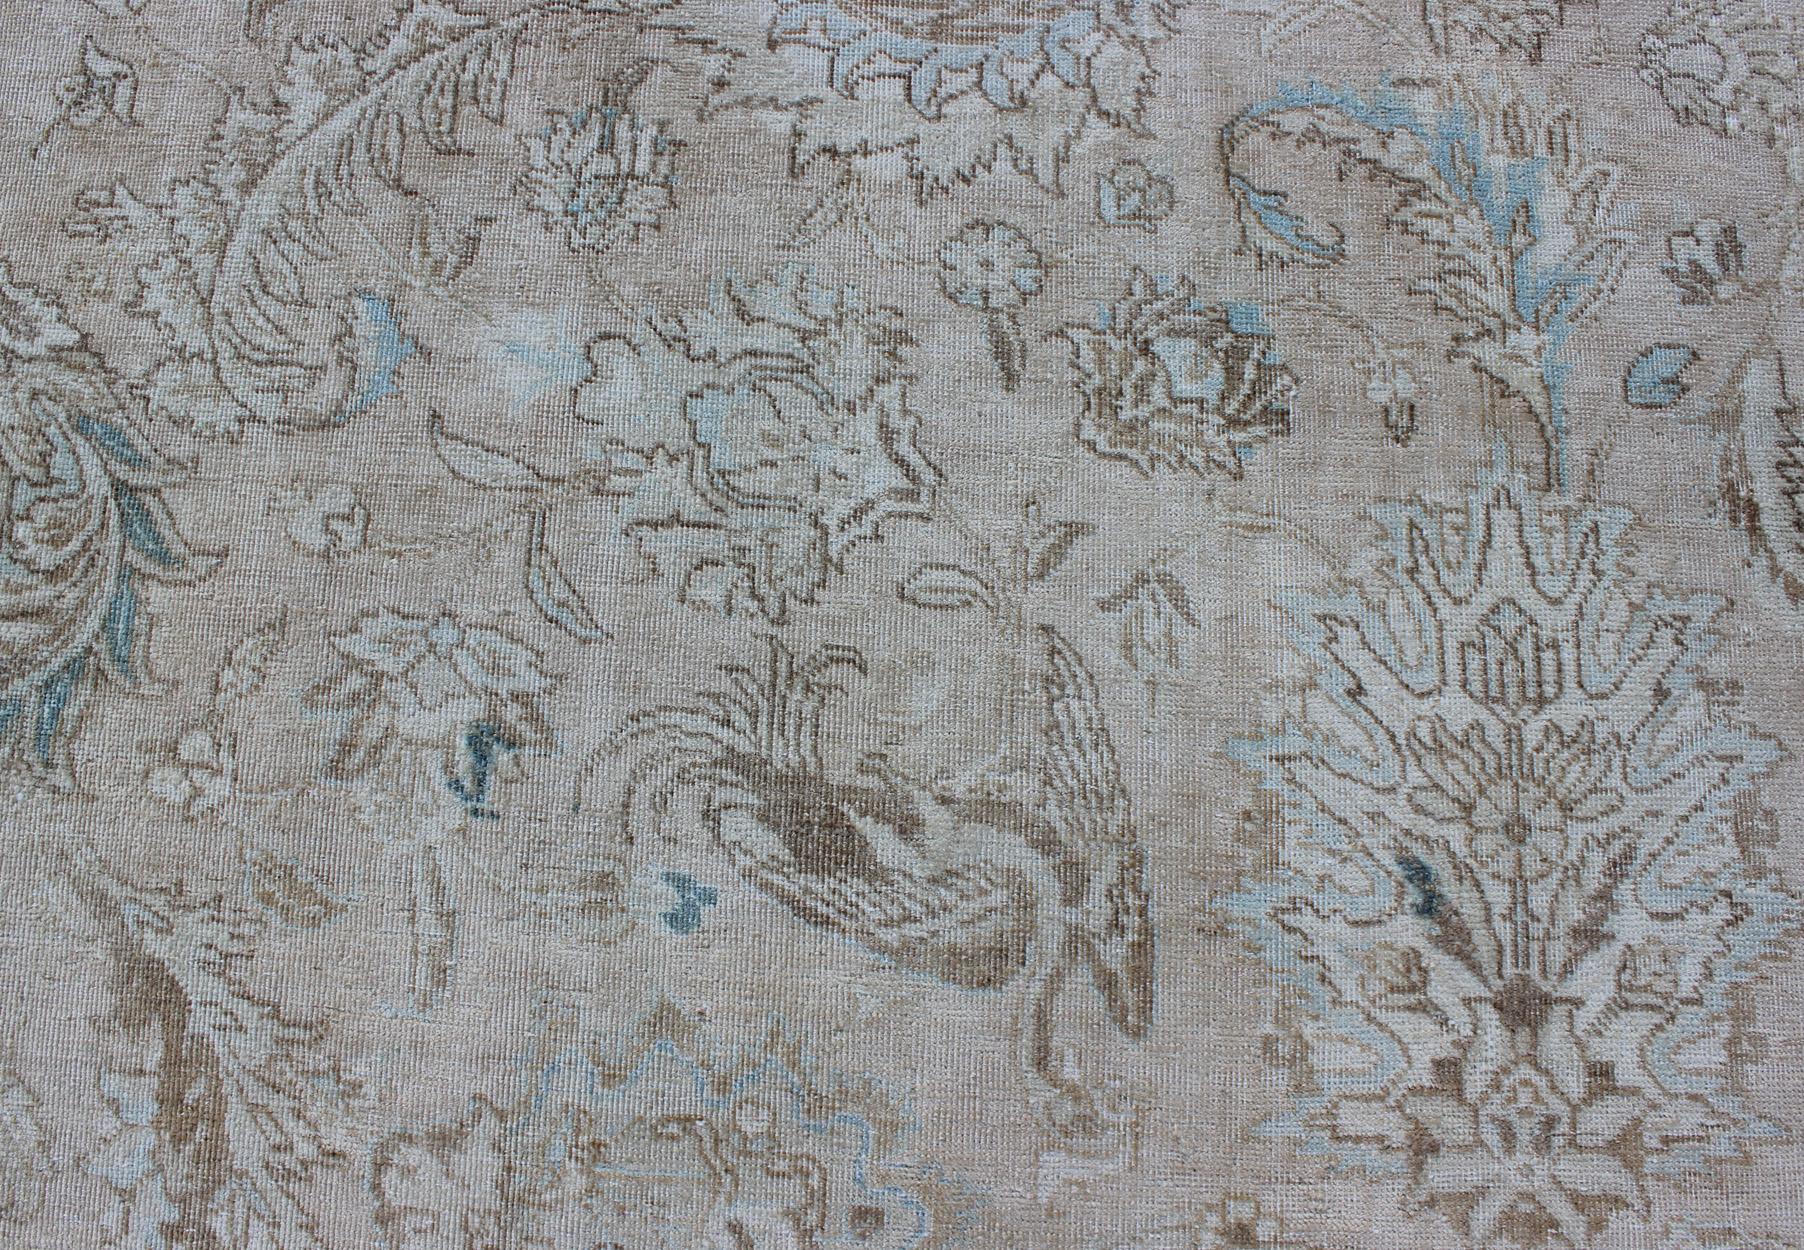 Muted Gray, Blue, and Ivory Vintage Persian Tabriz Rug with Floral Design In Excellent Condition For Sale In Atlanta, GA